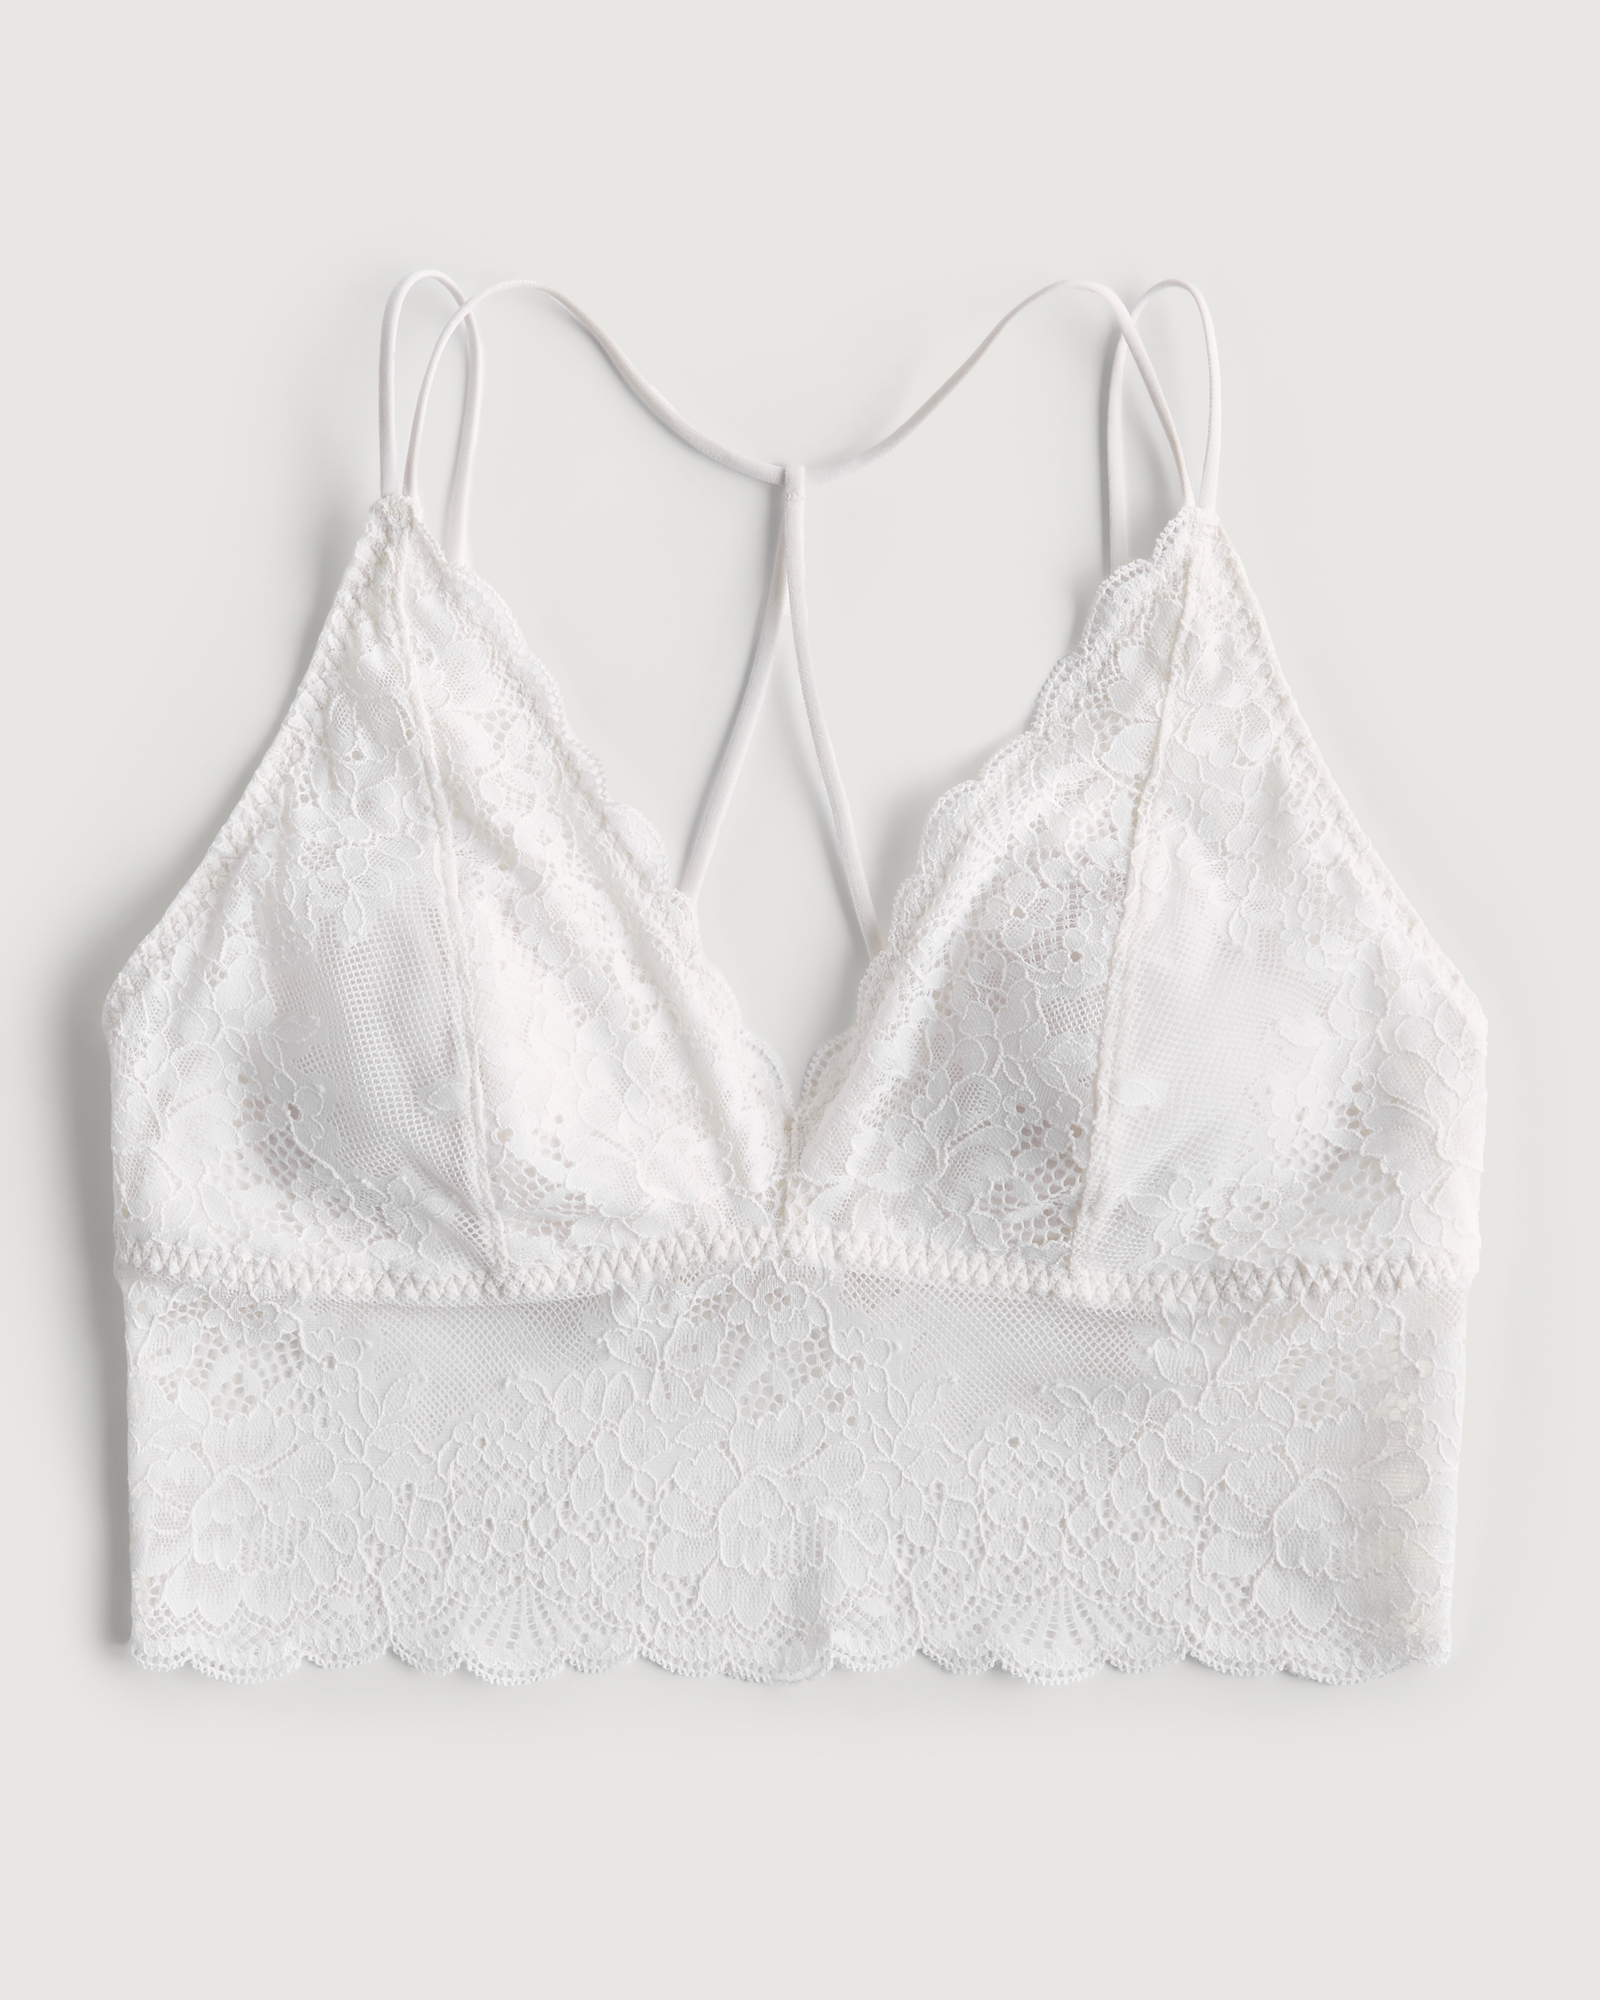 Gilly Hicks Hollister White Lace Halter Bralette Size M - $3 (90% Off